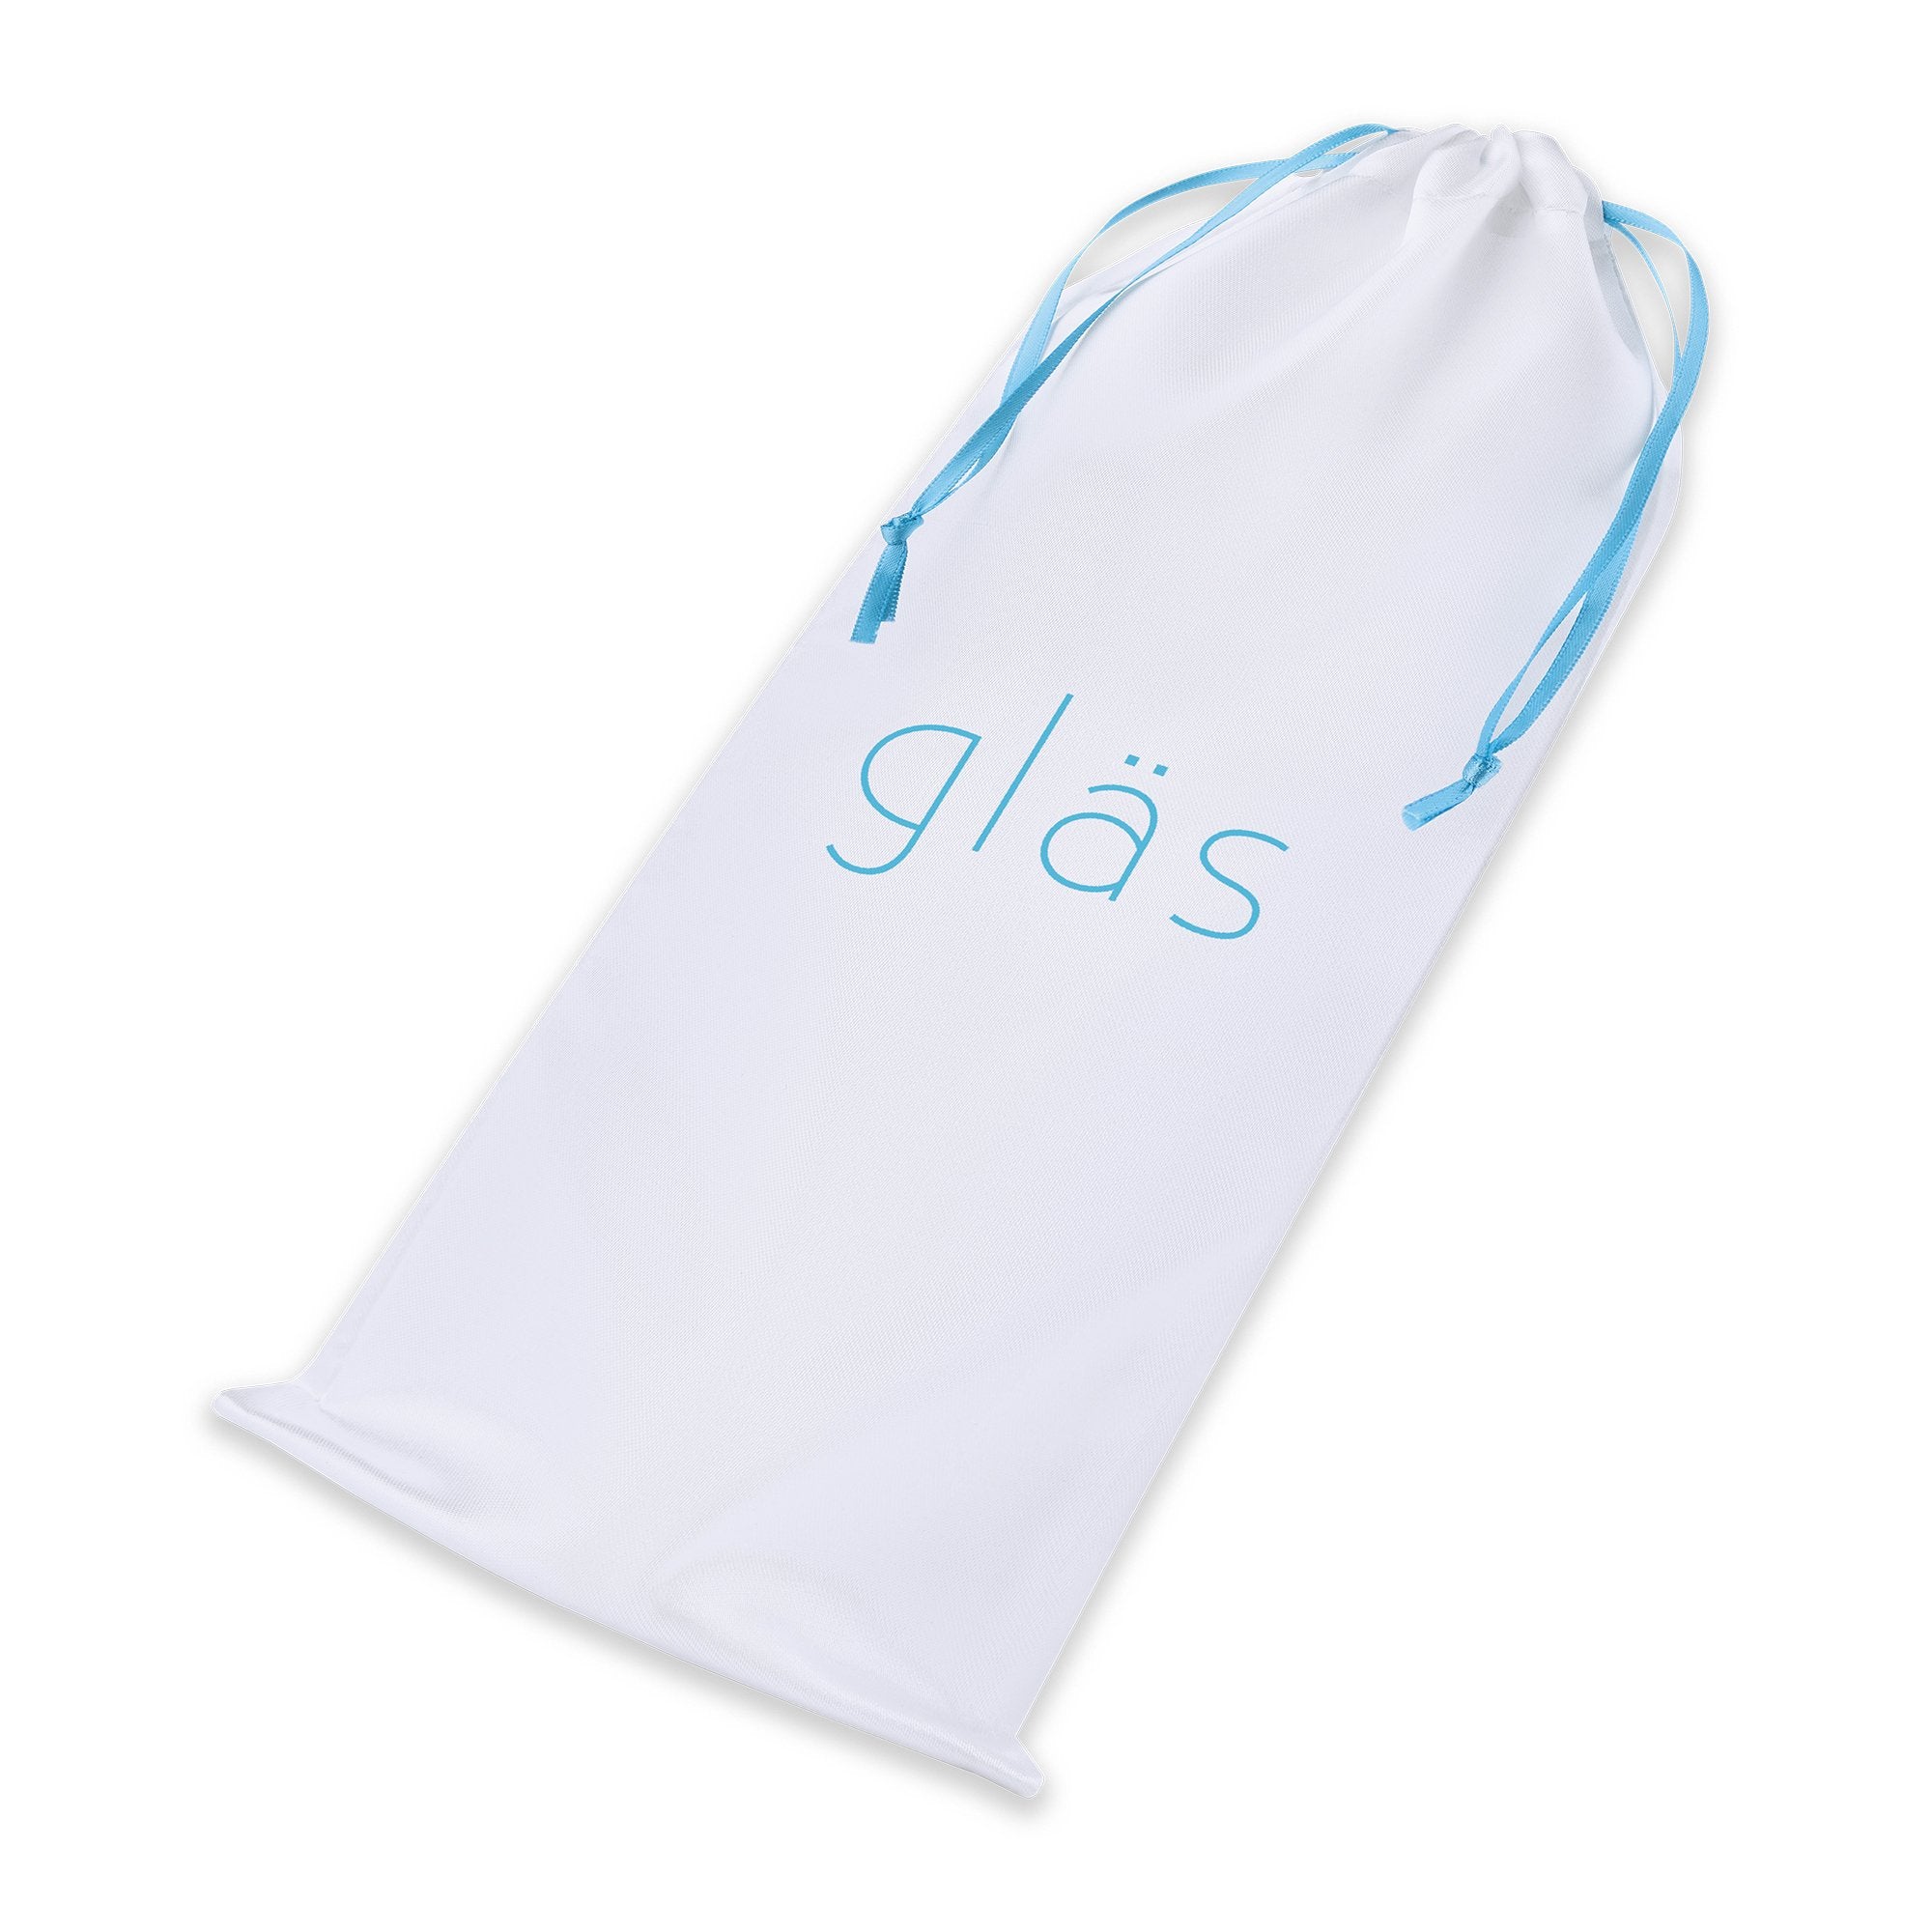 Storage Pouch of the Gläs 7 inch Realistic Curved Glass G-Spot Dildo